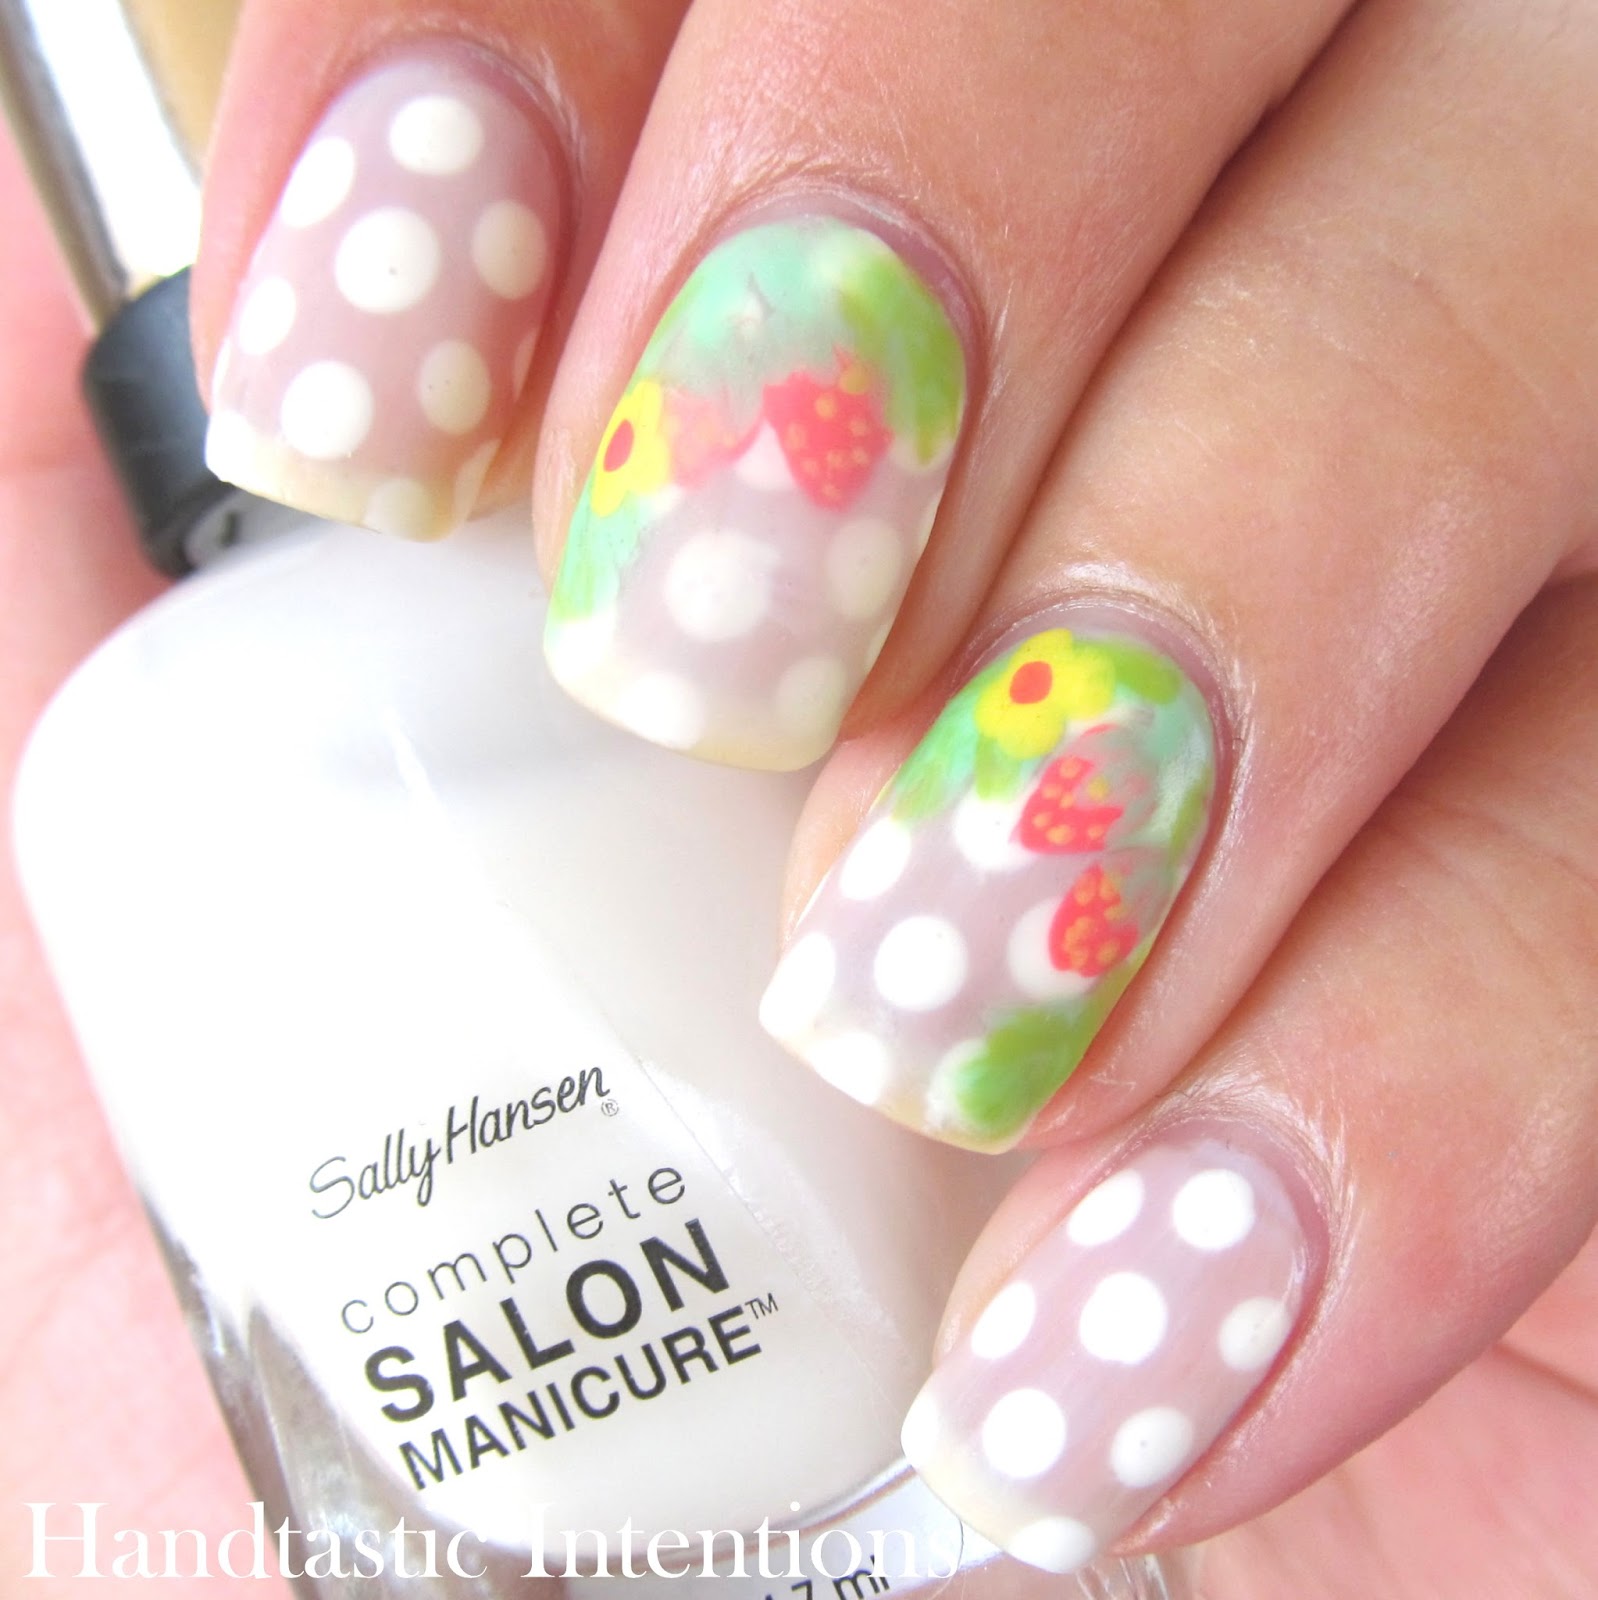 Handtastic Intentions: Nail Art: Strawberry Fields